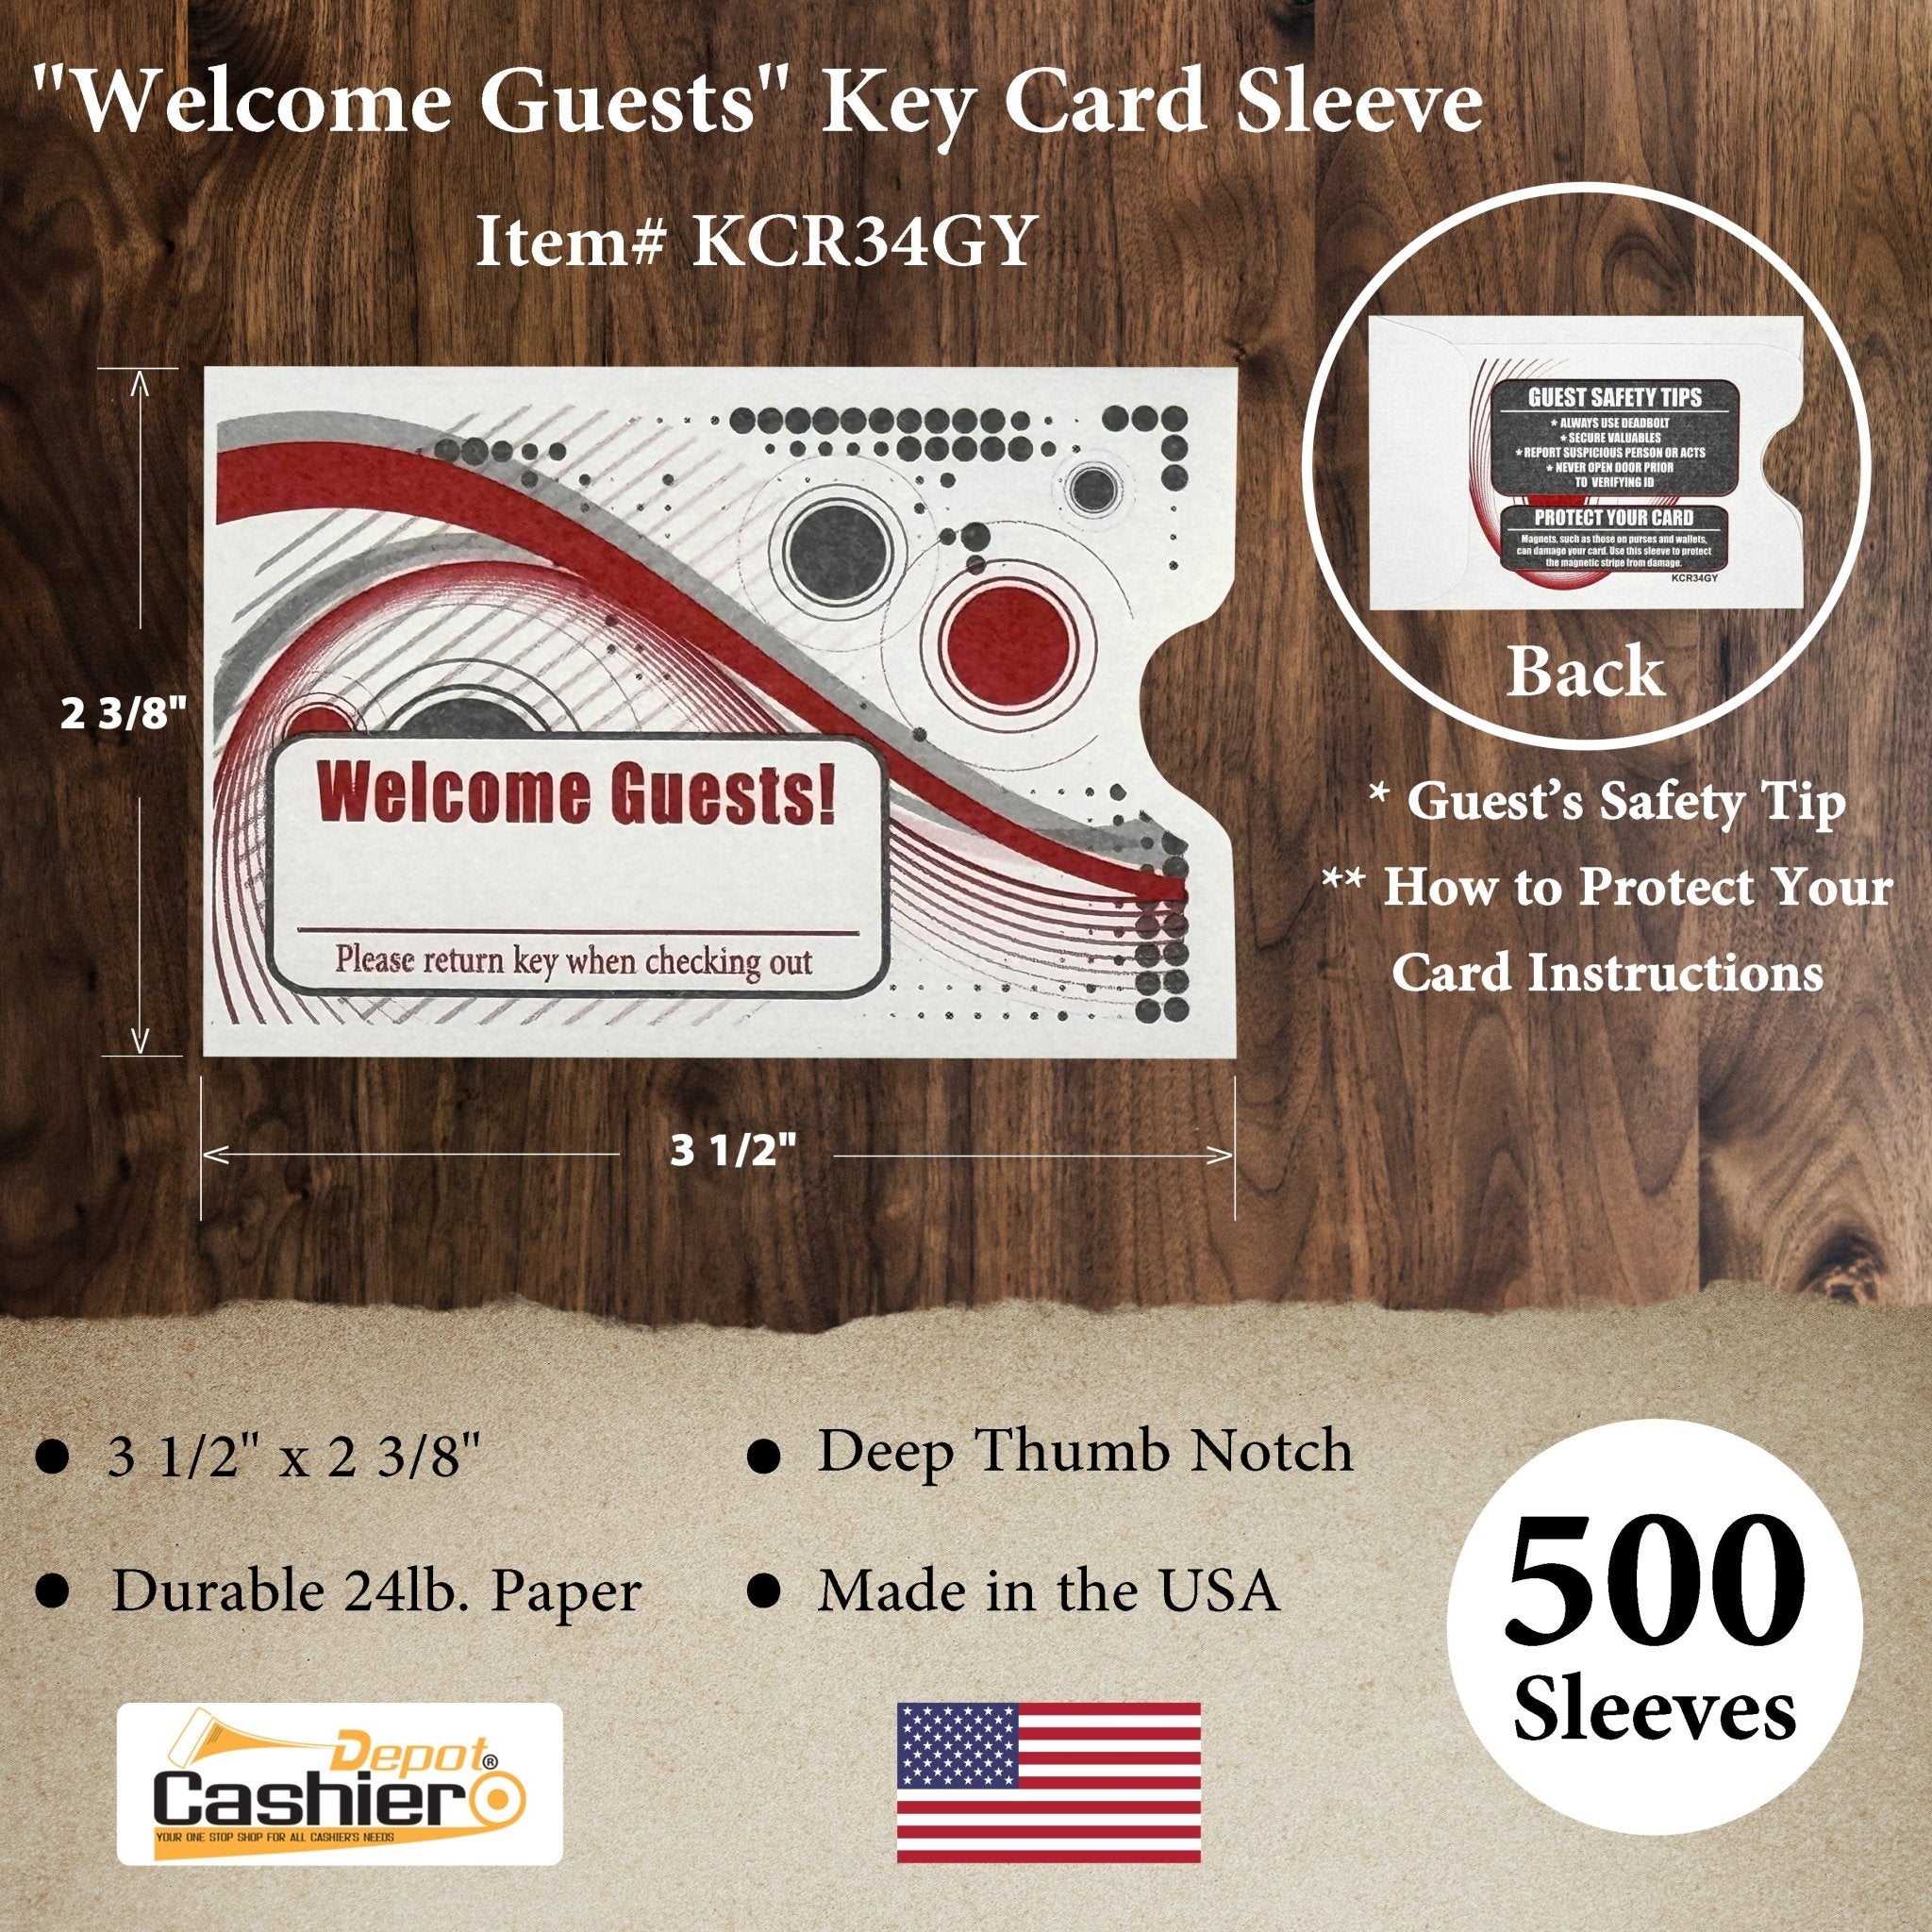 Hotel/ Motel "Welcome Guest" Key Card Sleeve, 2 3/8" X 3 1/2", Printed in Red/Gray, Premium 24lb. Paper, 500/Box (KCR34GY) - Cashier Depot